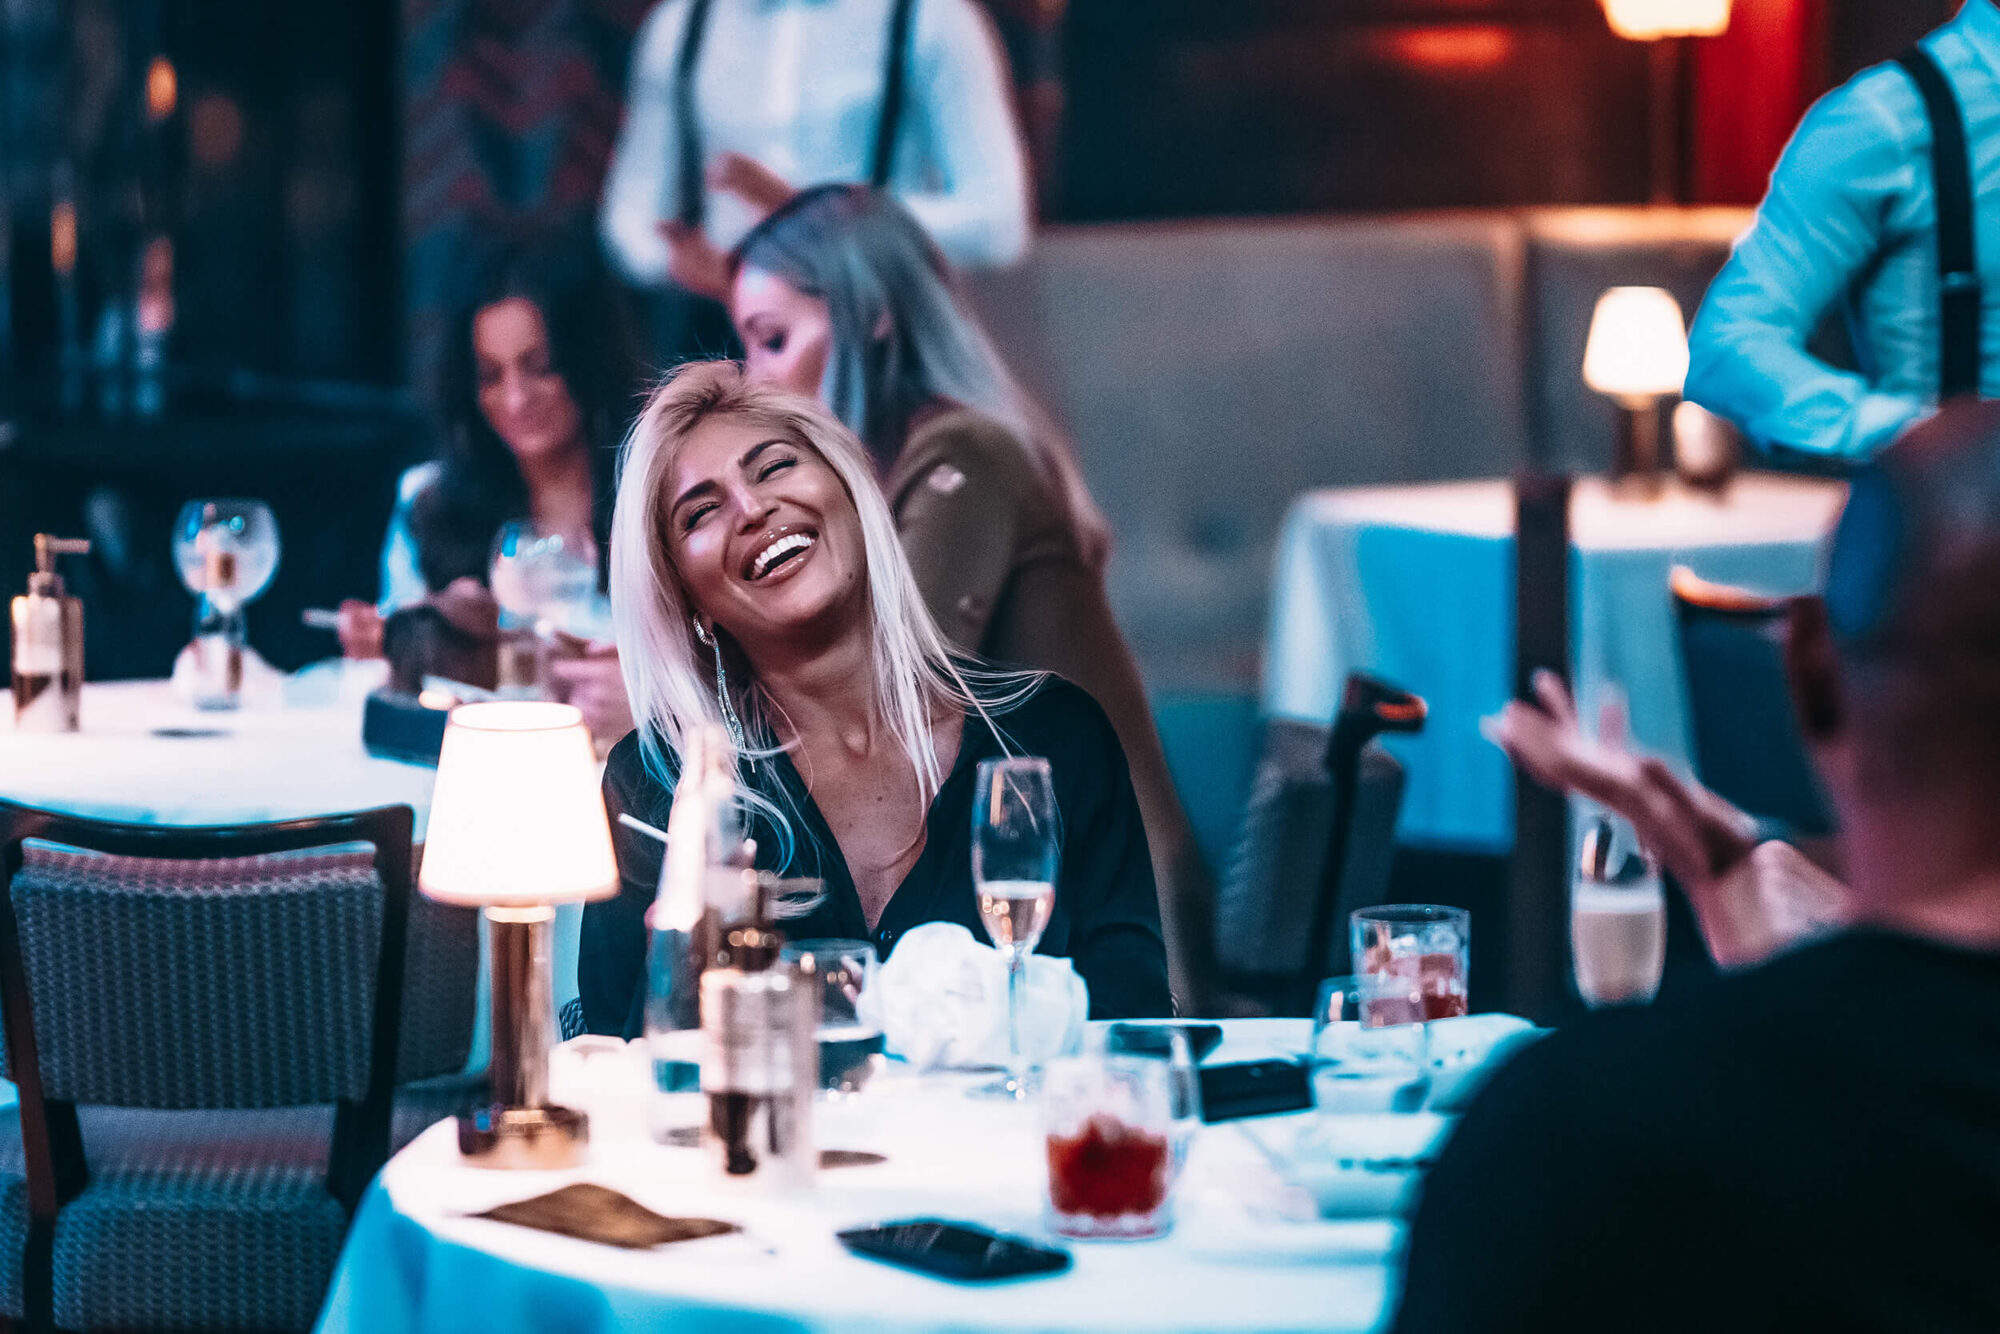 Girl laughing at table Billionaire